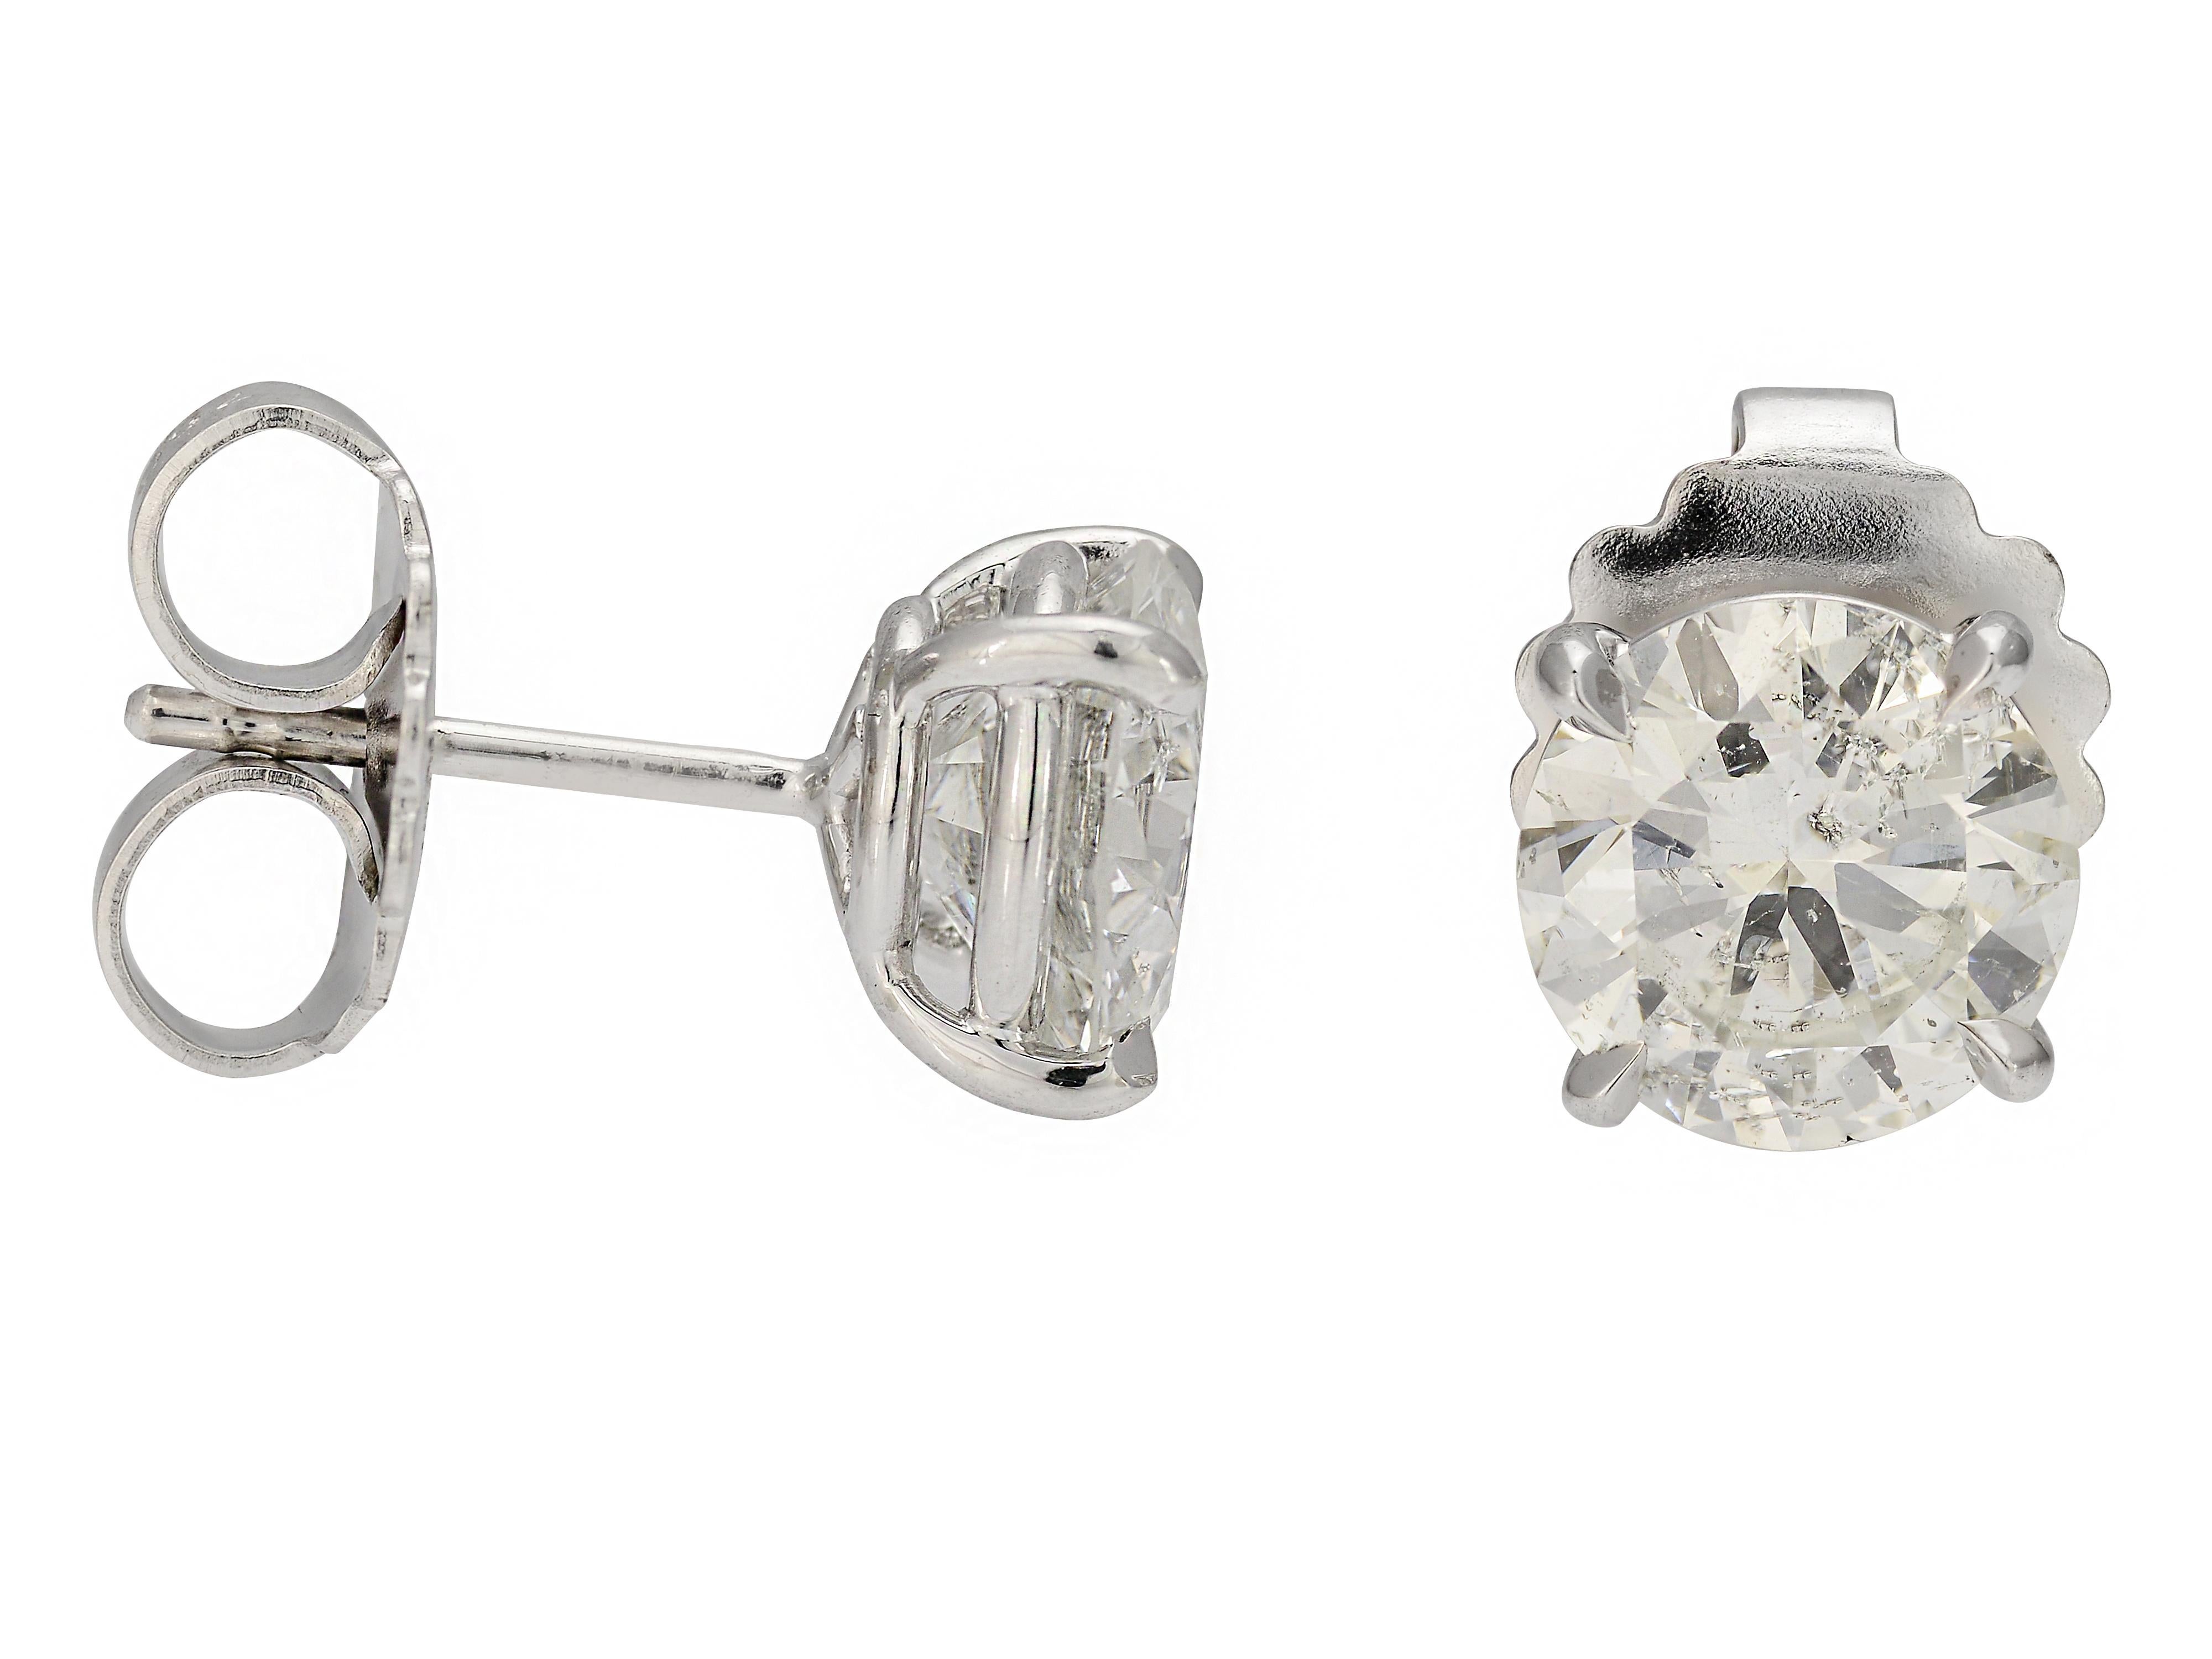 18 Karat White Gold Diamond Studs Featuring Two Round Brilliant GIA Graded Diamonds. The First Is 2.01 Carats I2 Clarity & I Color, And The Other Is 2.05 Carats I2 Clarity & G Color. The Diamonds Are Matched For Clarity, Diameter & Table Size. The 4